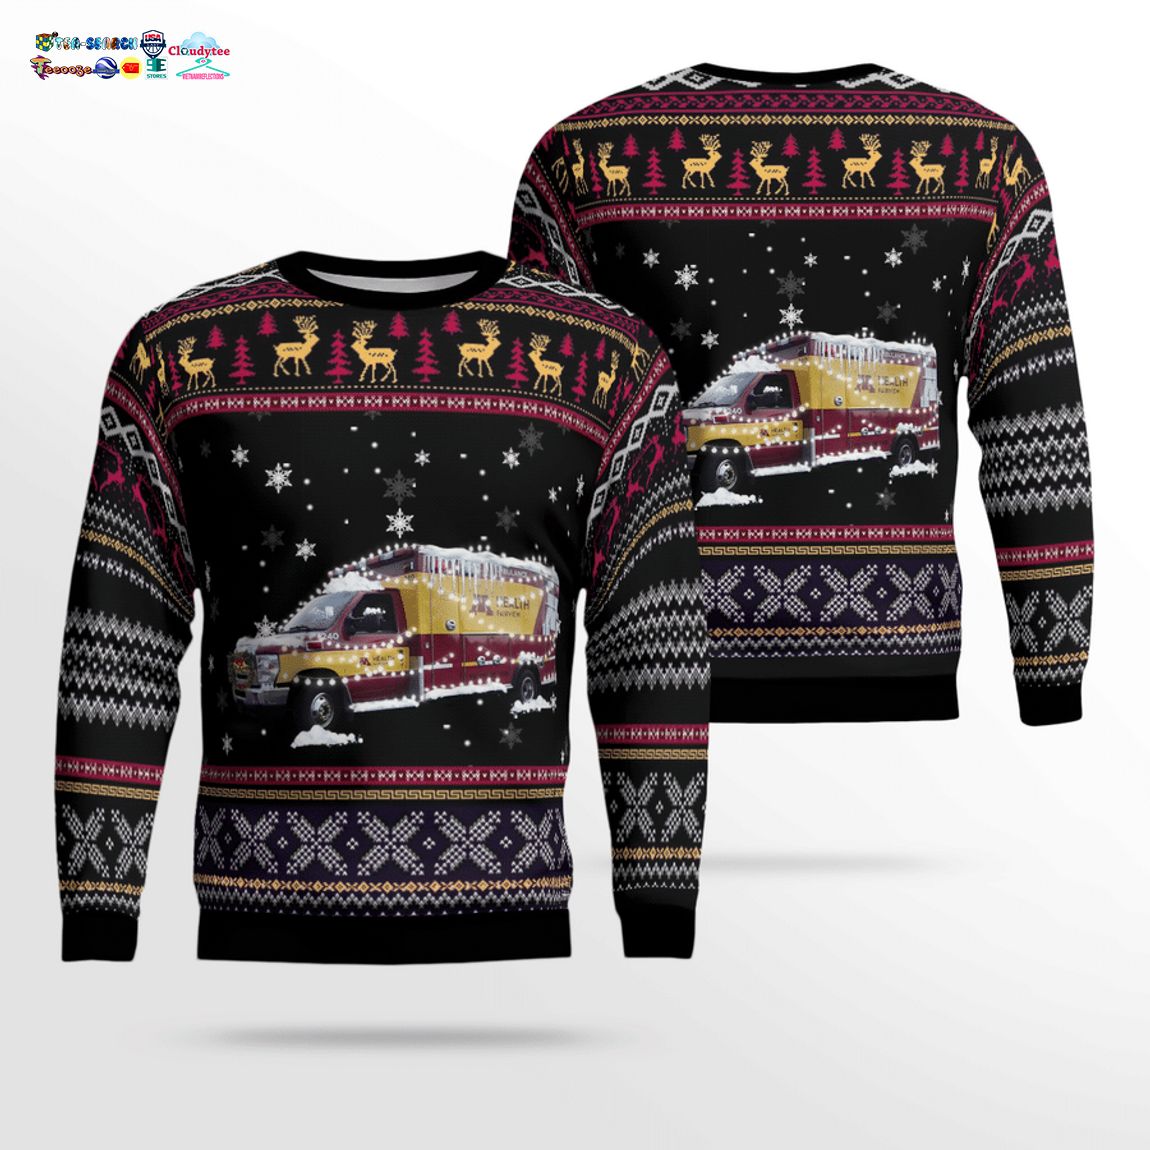 M Health Fairview EMS 3D Christmas Sweater - Nice place and nice picture